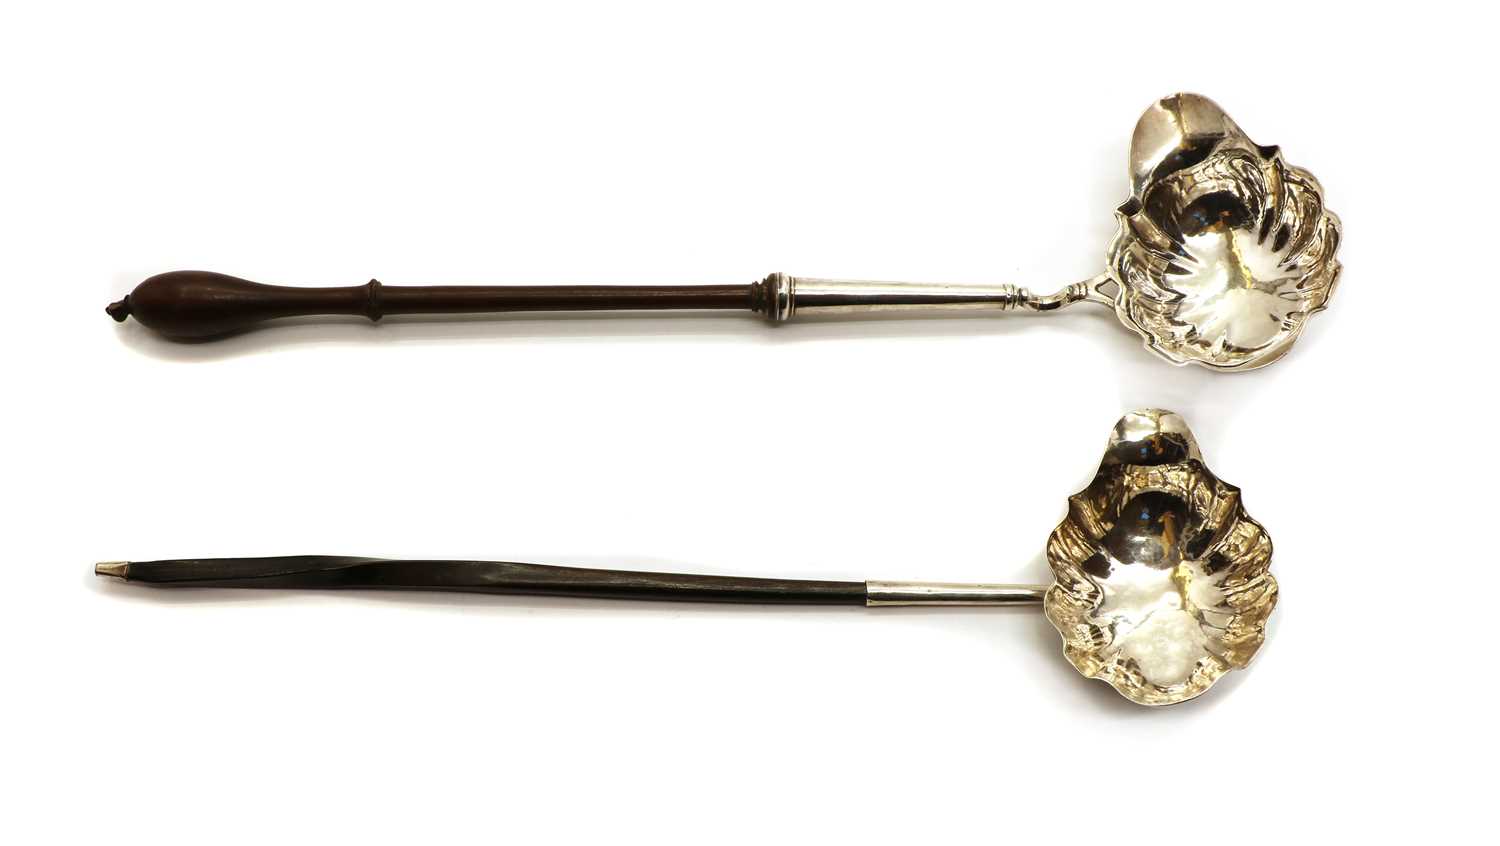 Lot 29 - An 18th century silver and wood handle toddy ladle